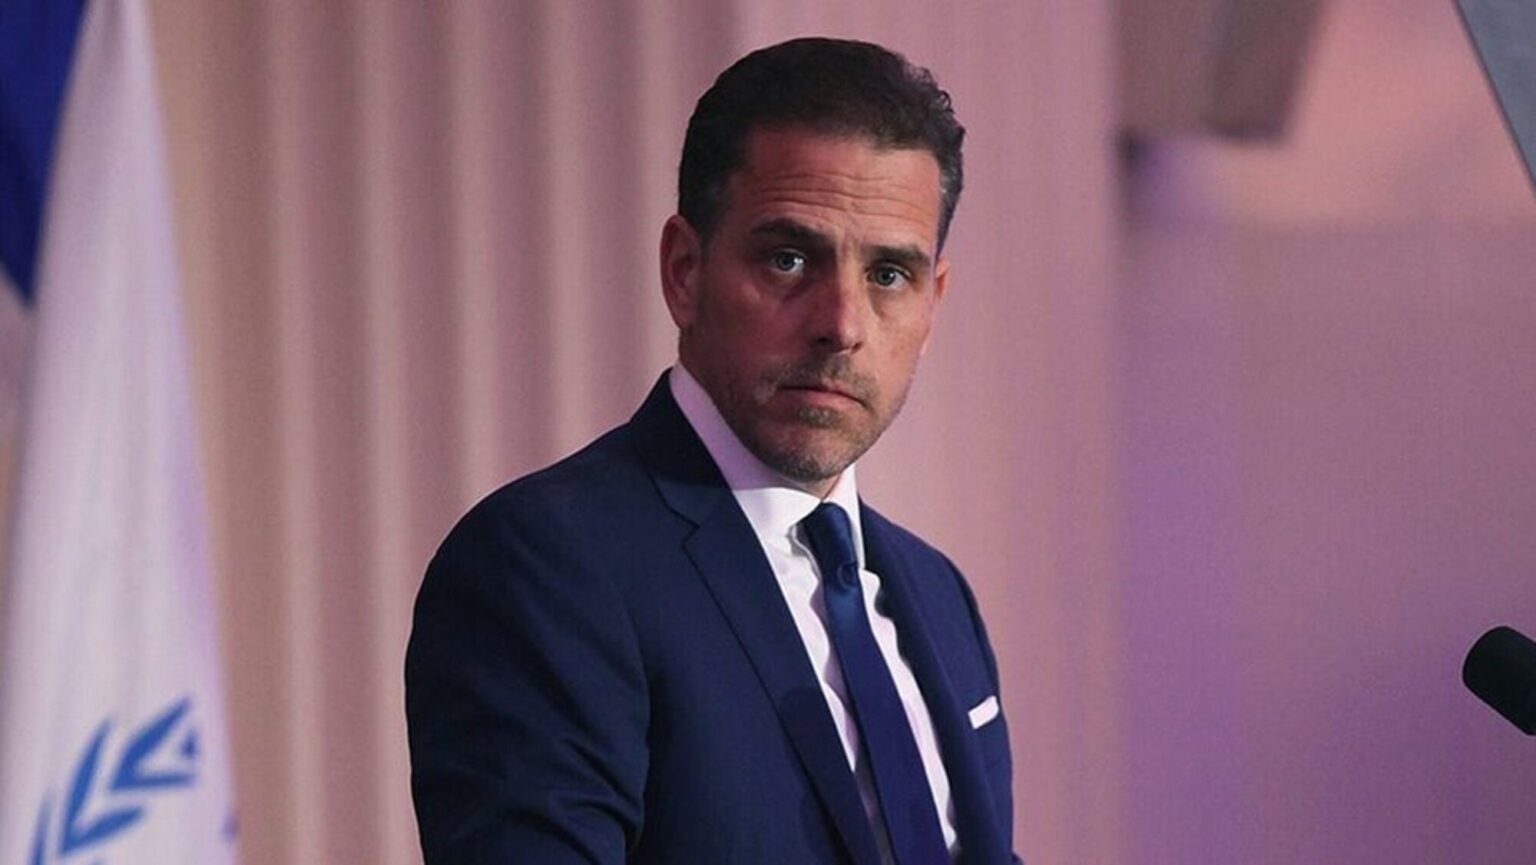 Hunter Biden is certainly no stranger to controversy, and his name manages to make headlines every couple of months. Will this ruin his net worth?